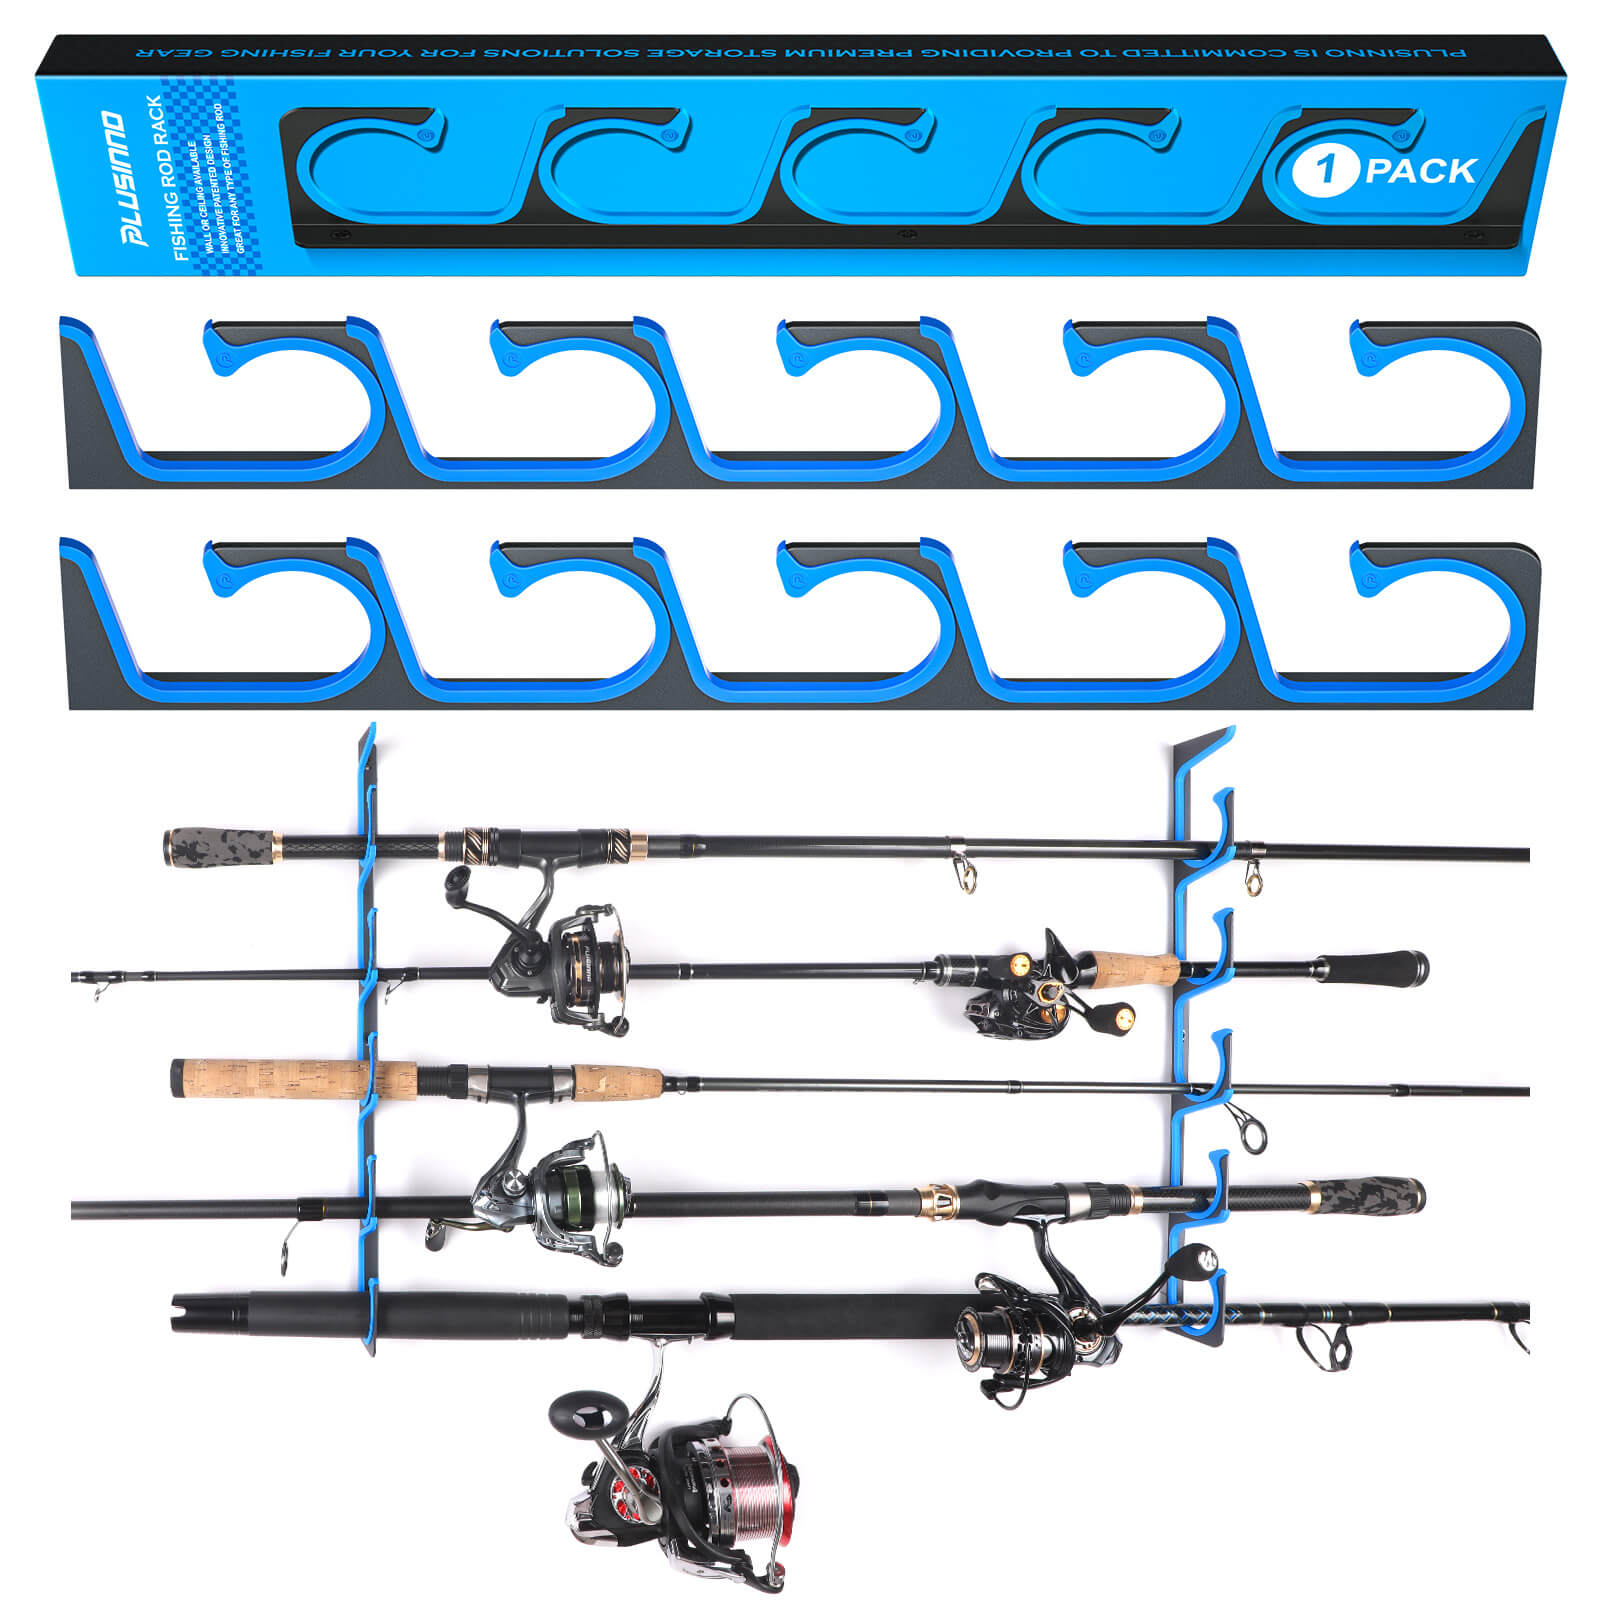 PLUSINNO V9 Vertical Fishing Rod Holders, Wall Mounted Fishing Pole  Holders, Fishing Rod Rack Holds Up to 9 Rods or Combos, Fishing Rod Holders  for